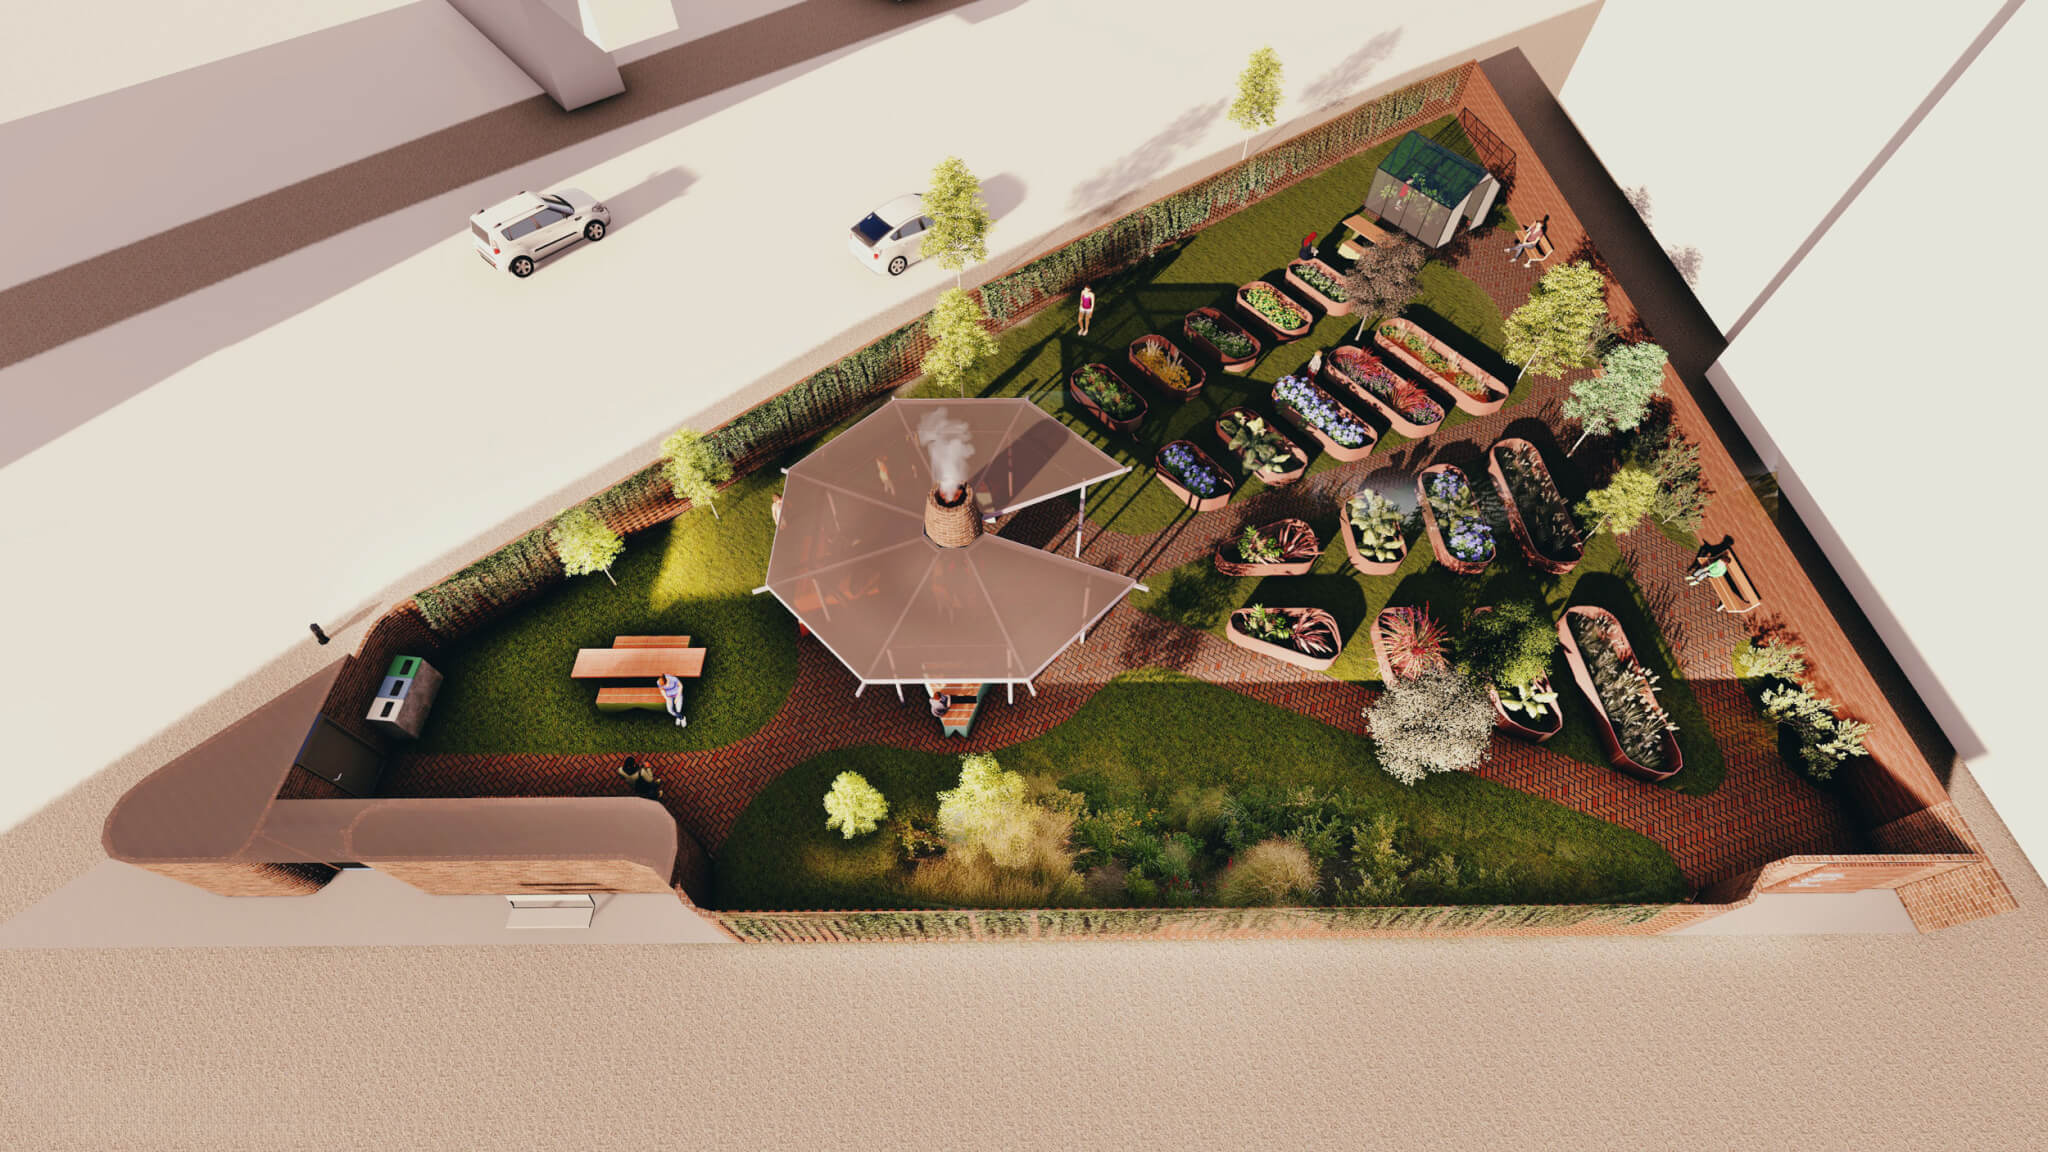 Triangular garden space render from aerial view with garden beds and a greenhouse and a hearth.